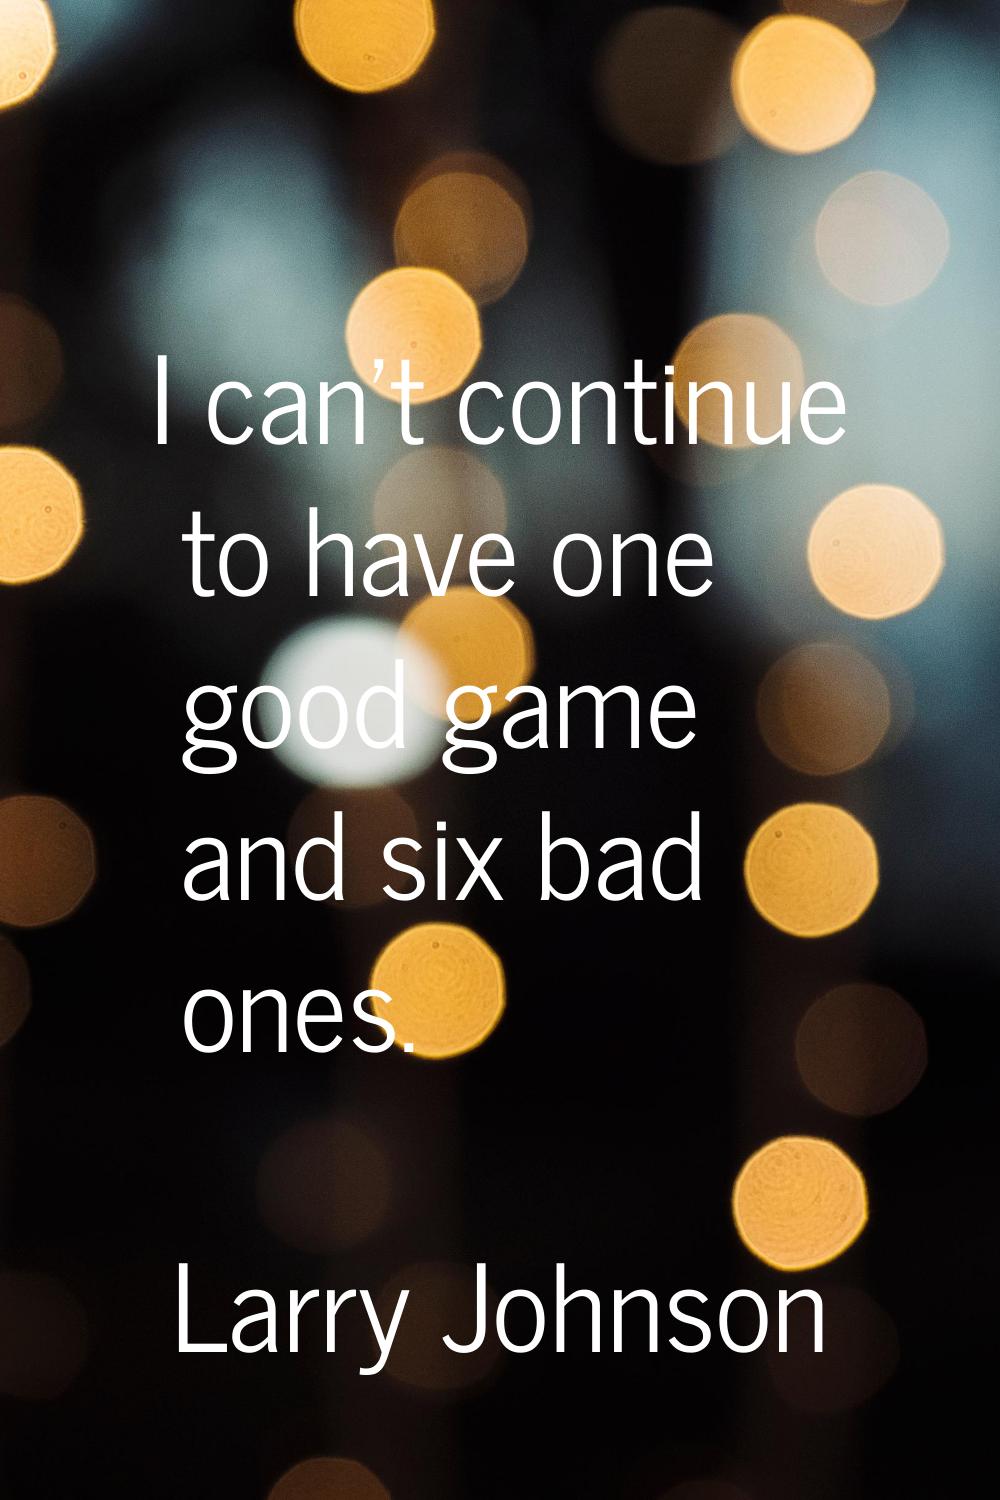 I can't continue to have one good game and six bad ones.